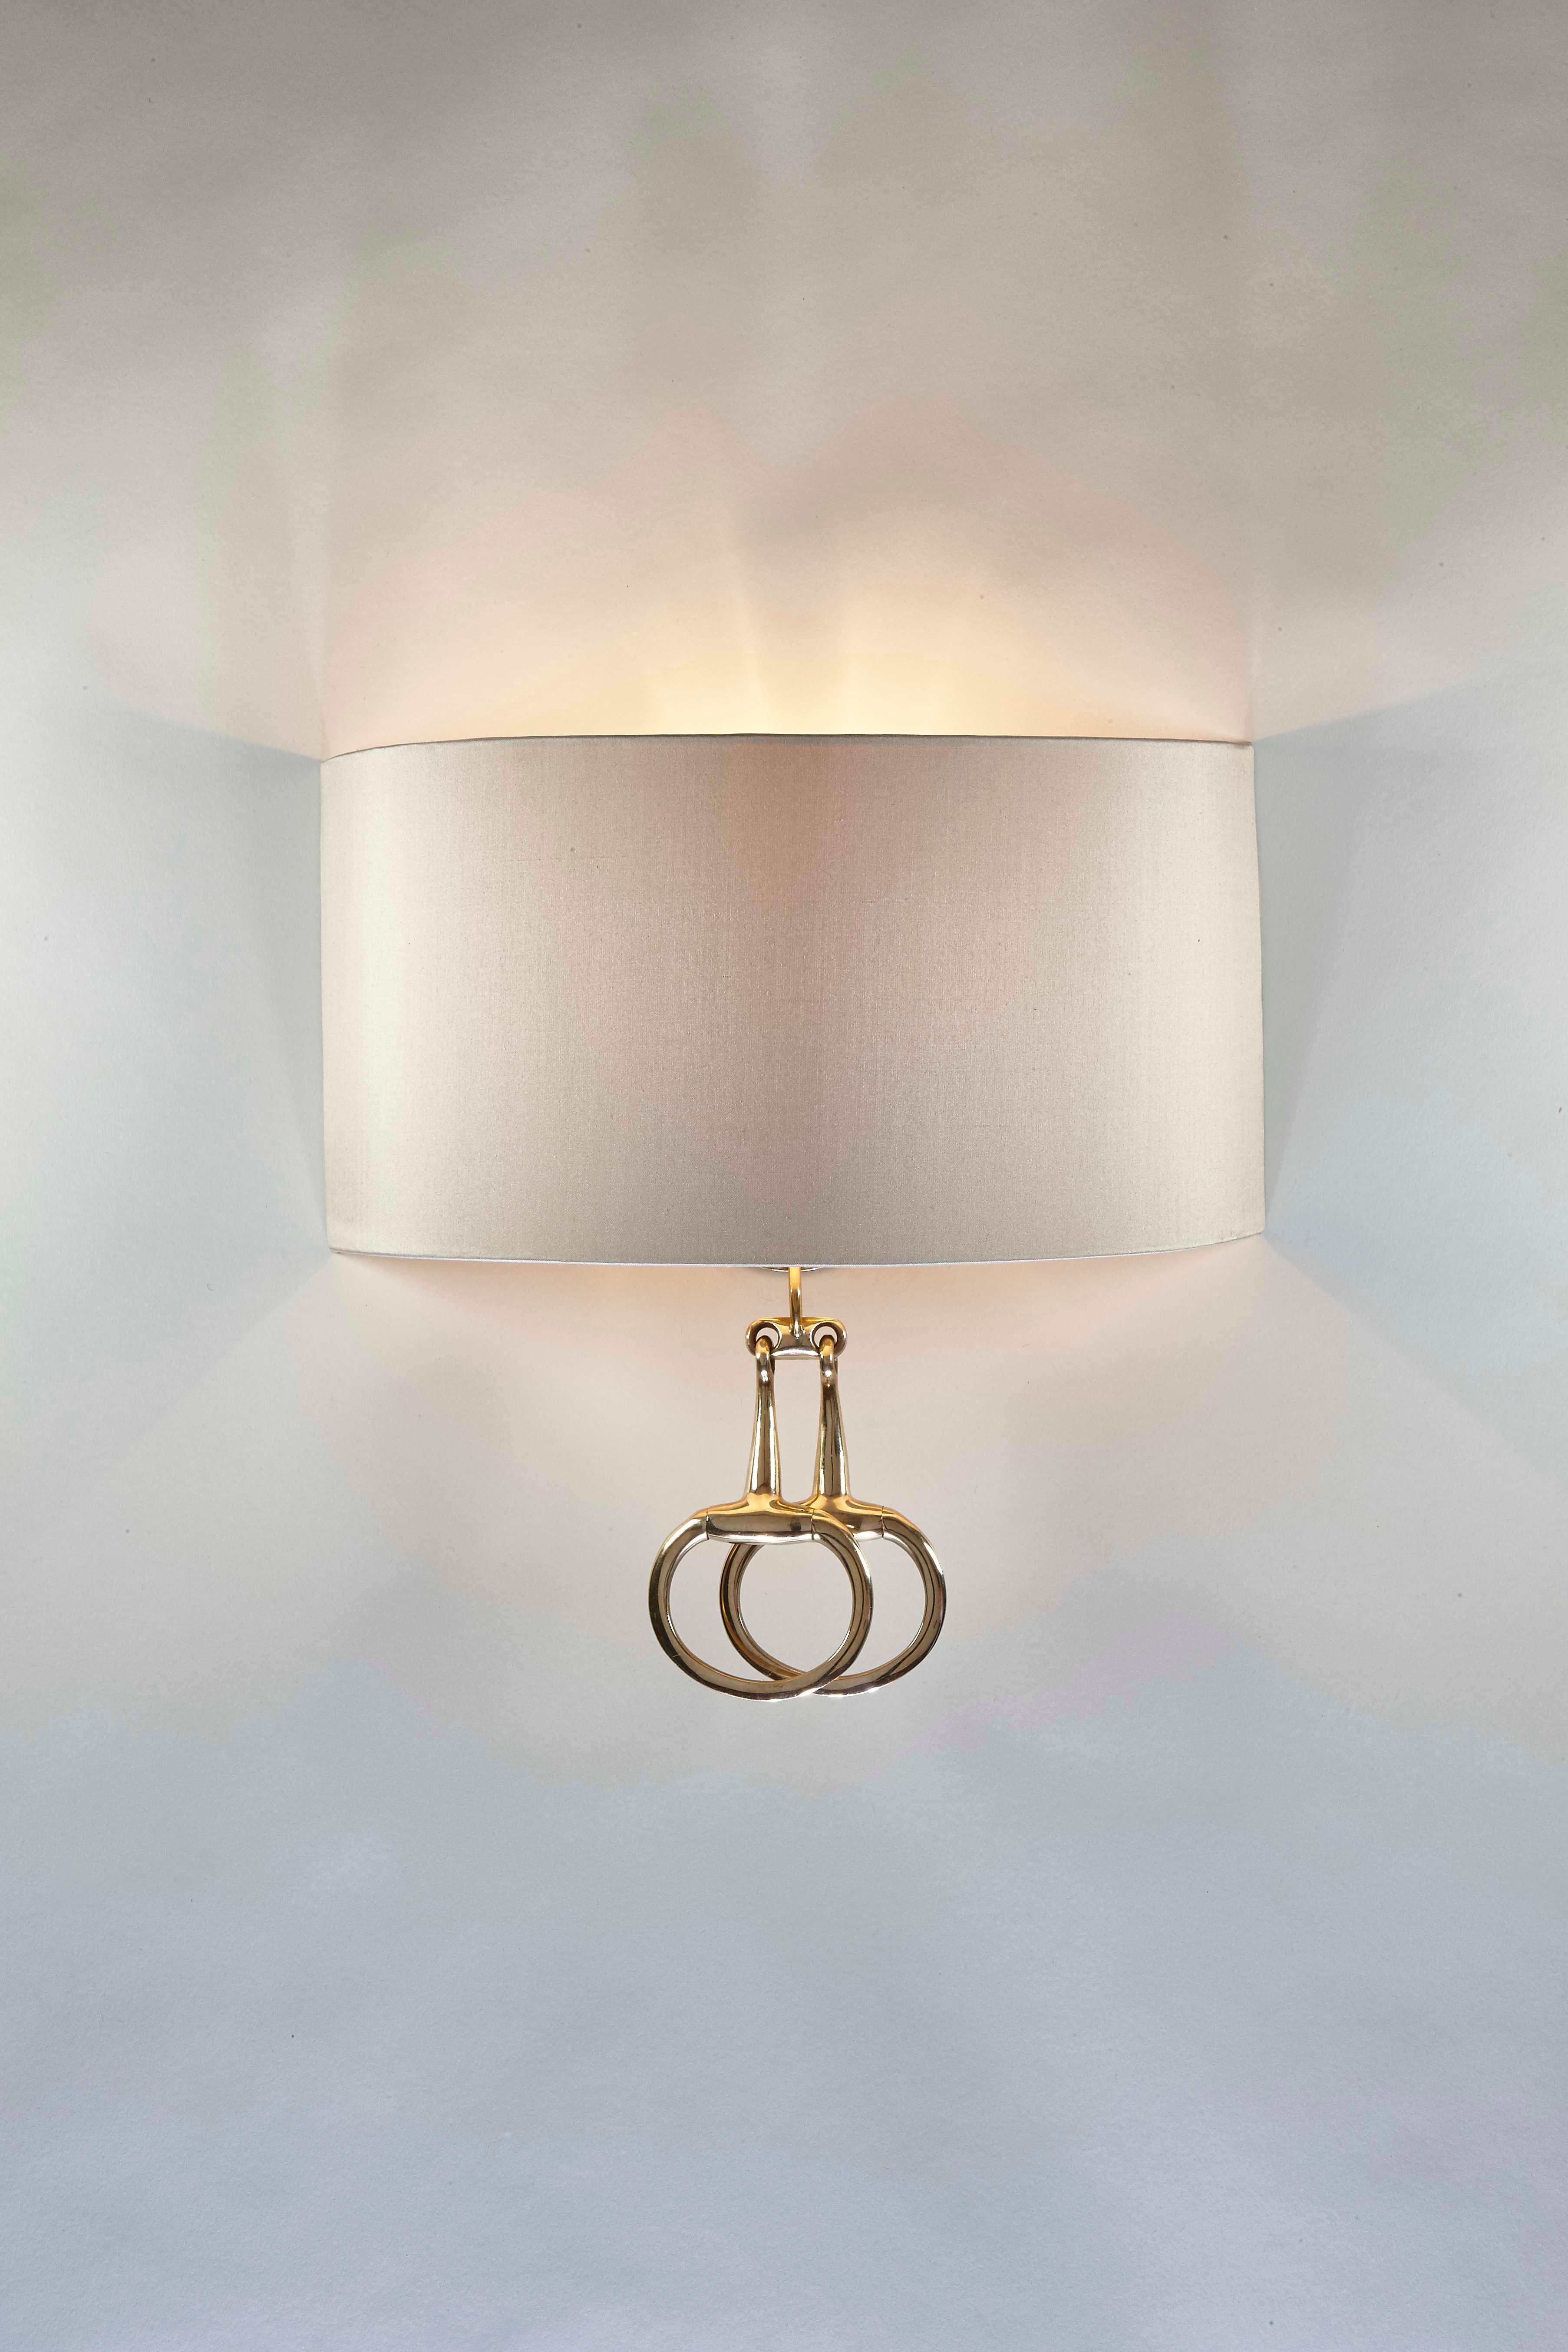 Named ‘Ronnie’ after a horse very dear to Cocovara’s founder. These handmade wall lights have a soft bespoke half-shade with a gorgeous polished brass snaffle as its centrepiece. Available in both long and short versions perfect for any country home